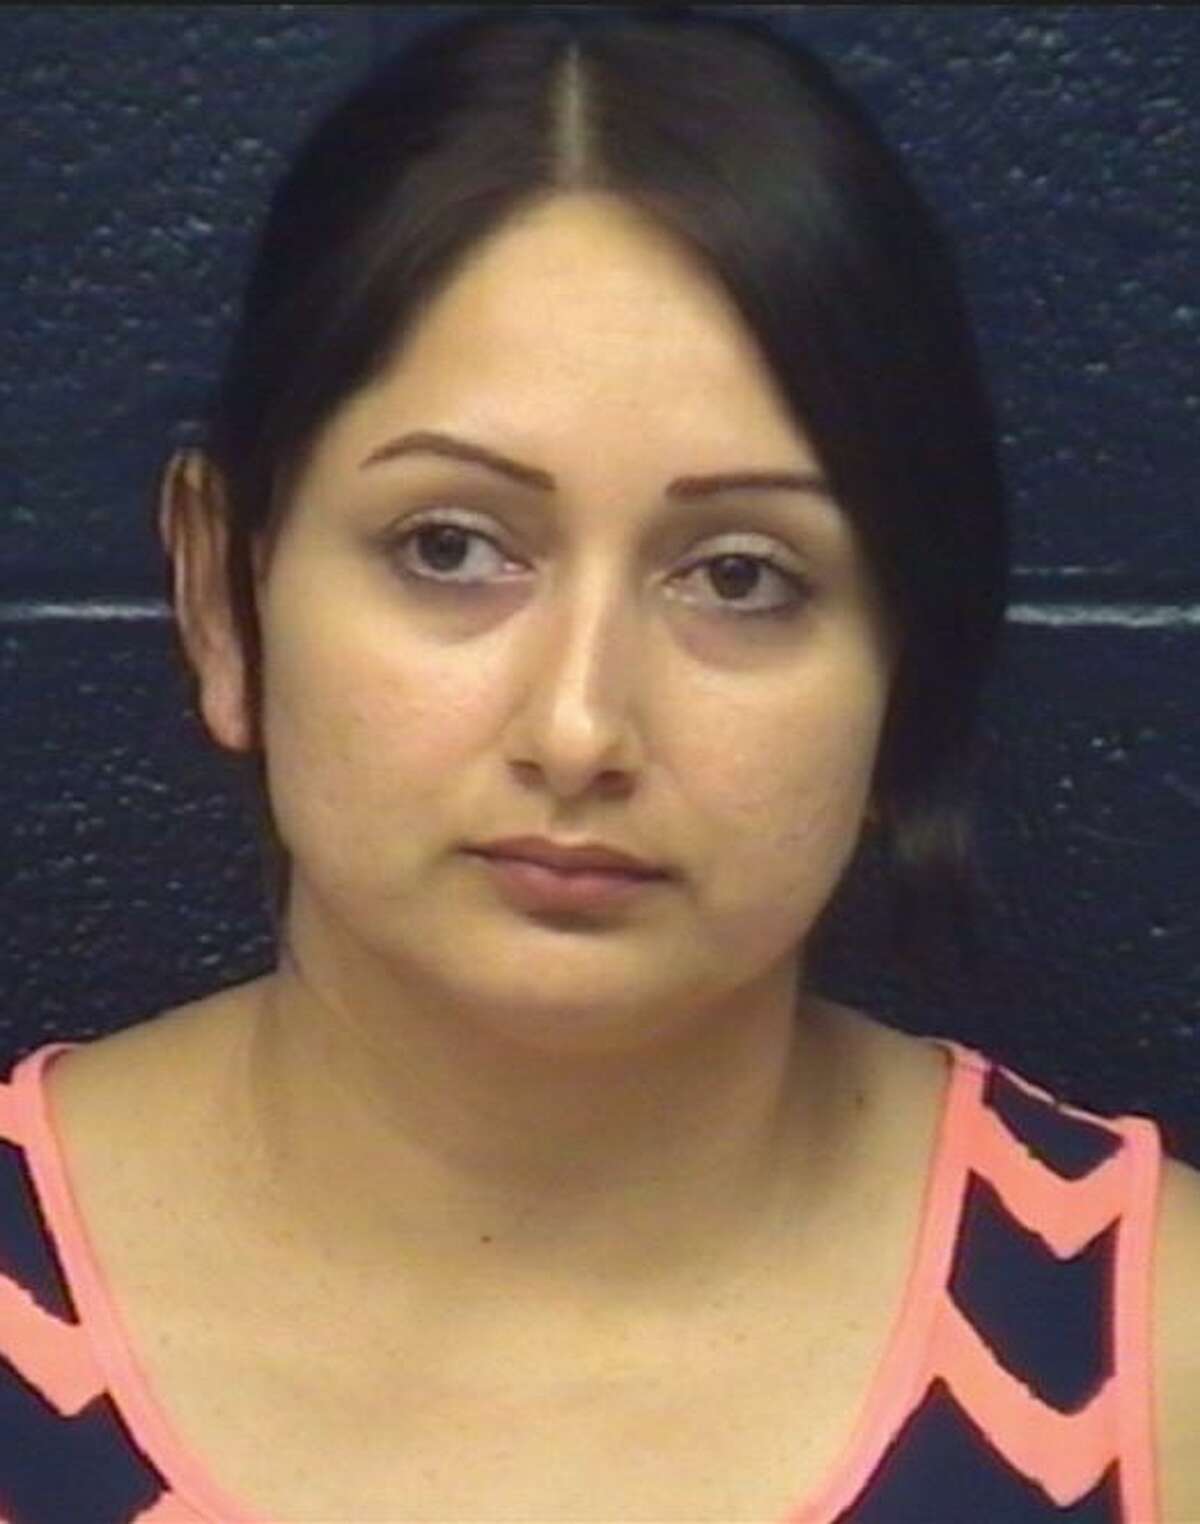 Rosa Chapa, 33, was charged with gambling promotion and engaging in organized criminal activity.